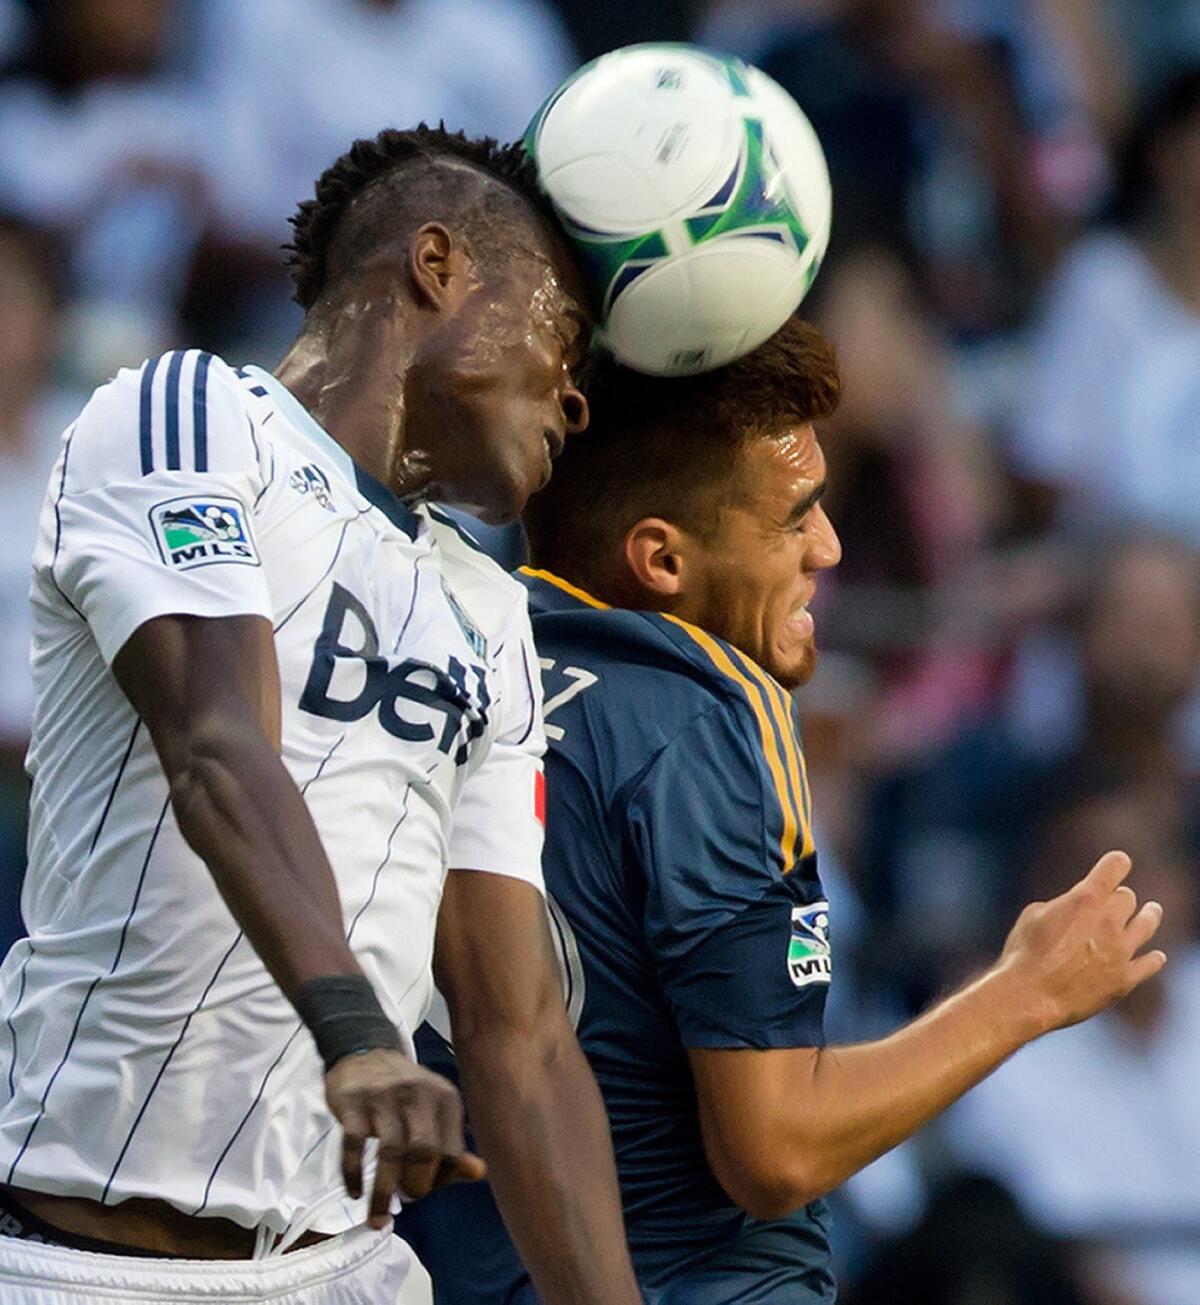 Vancouver's Gershon Koffe, left, and Galaxy midfielder Hector Jimenez battle for the ball during a game in August. Don't expect to see any major changes to the 2014 Major League Soccer schedule, a spokesman says.